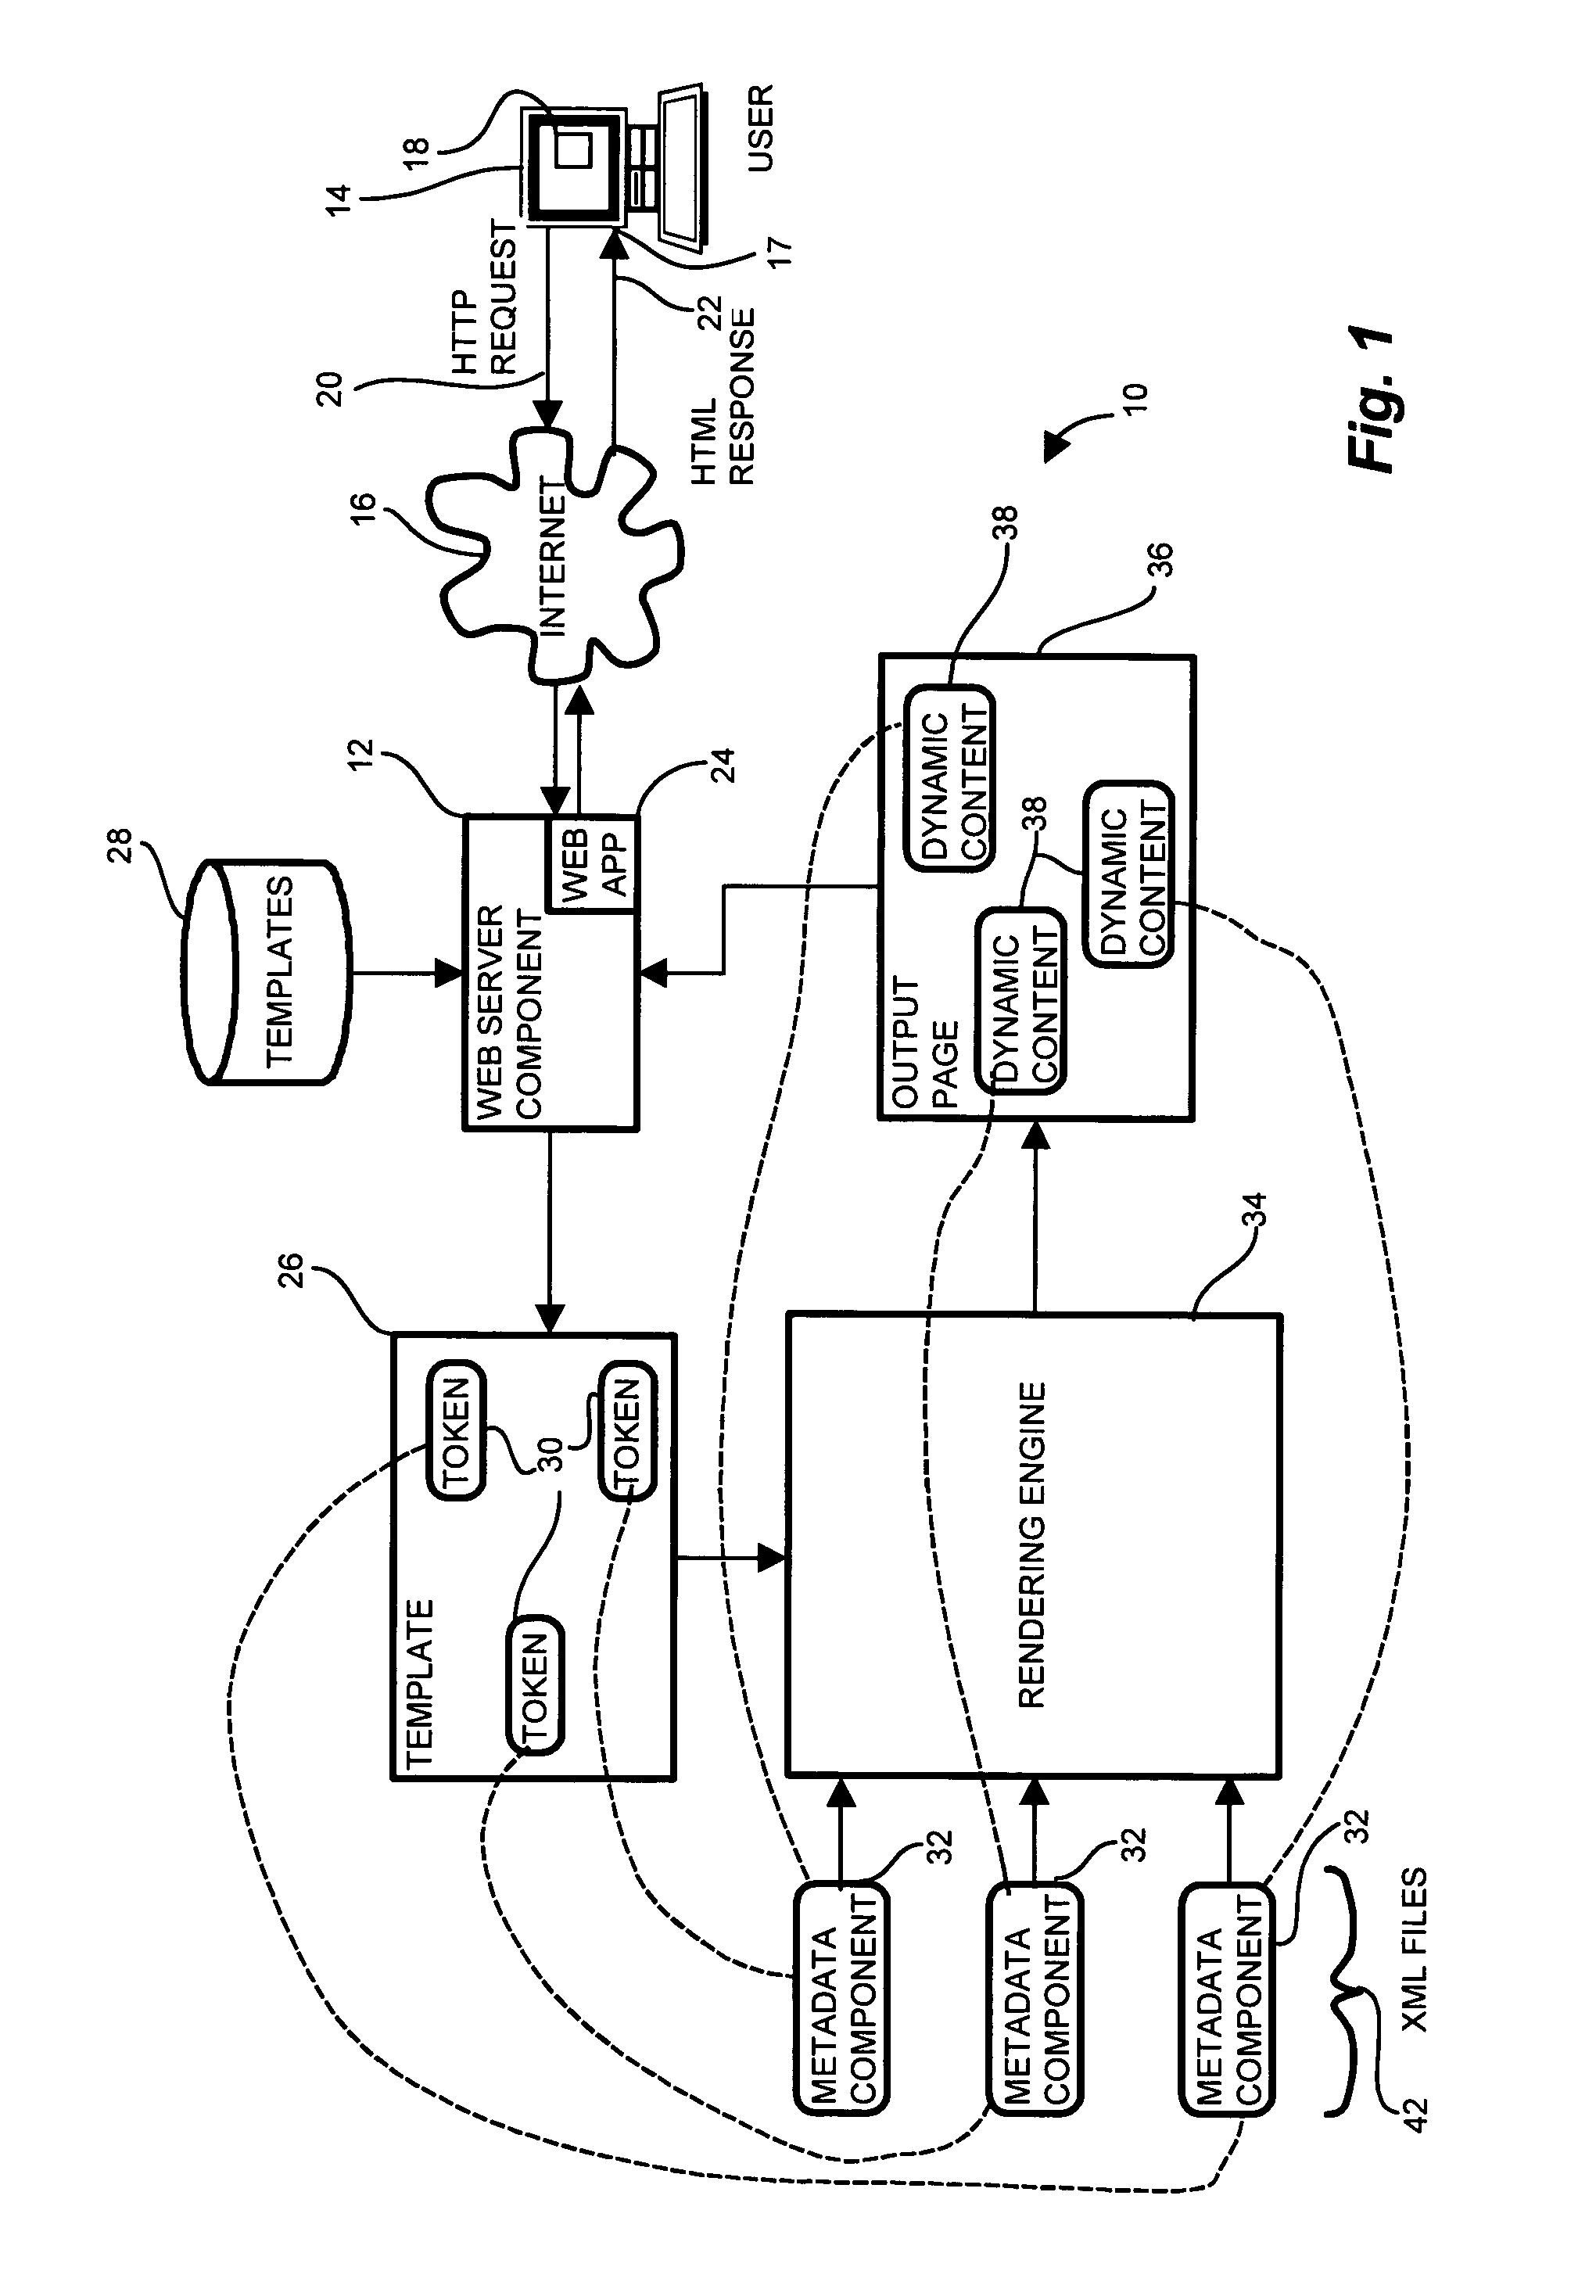 System and method for a page rendering framework